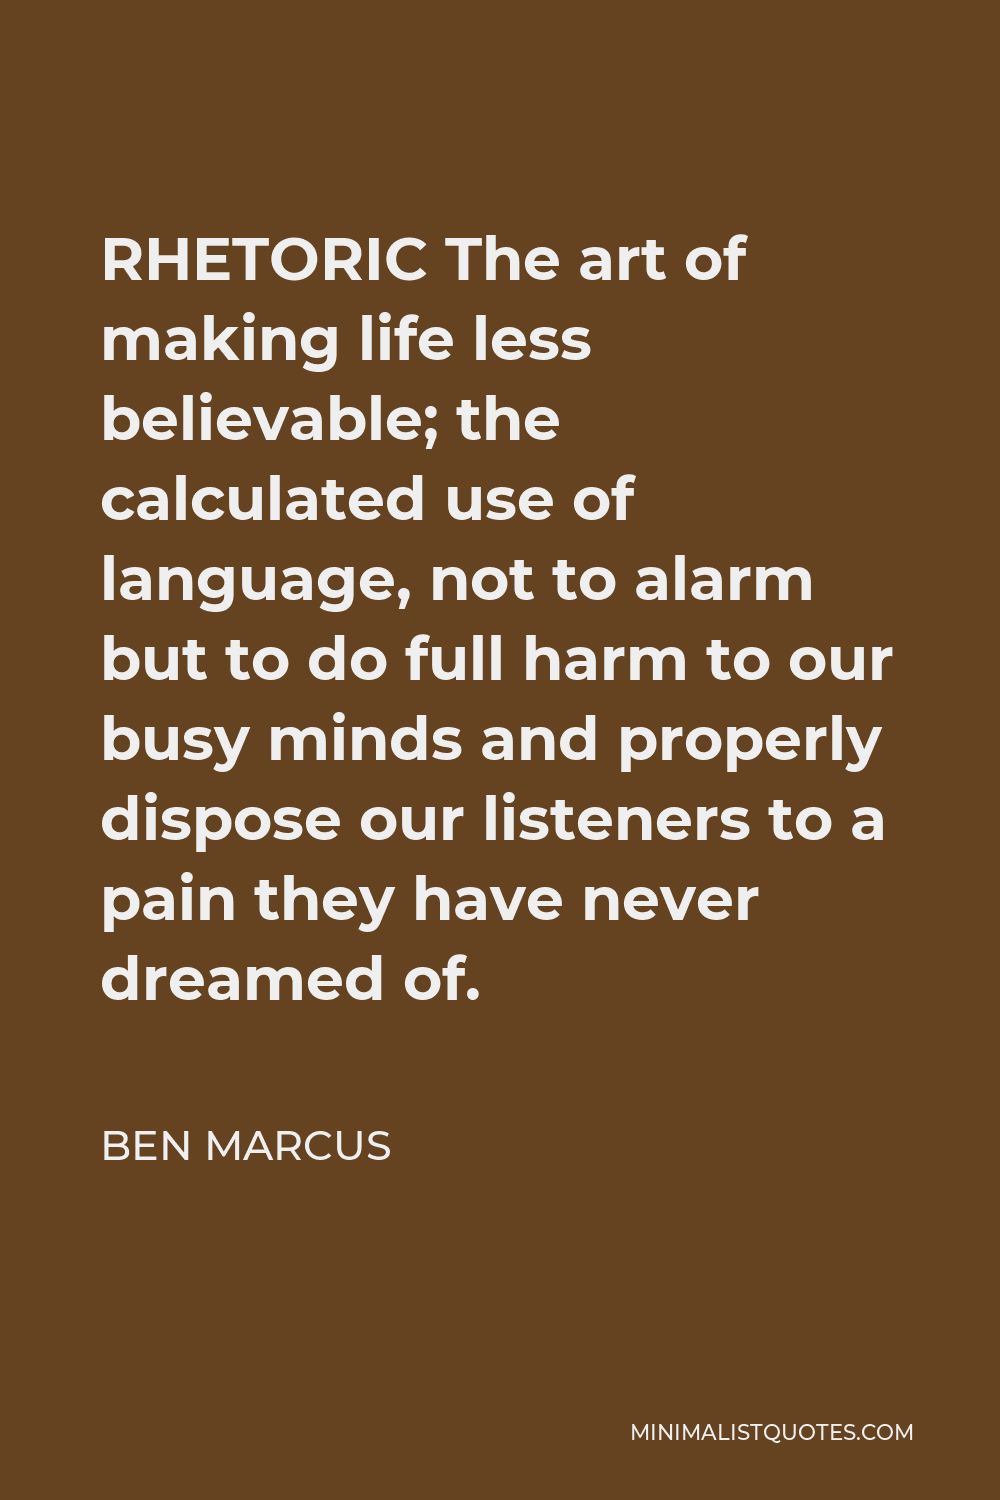 Ben Marcus Quote - RHETORIC The art of making life less believable; the calculated use of language, not to alarm but to do full harm to our busy minds and properly dispose our listeners to a pain they have never dreamed of.